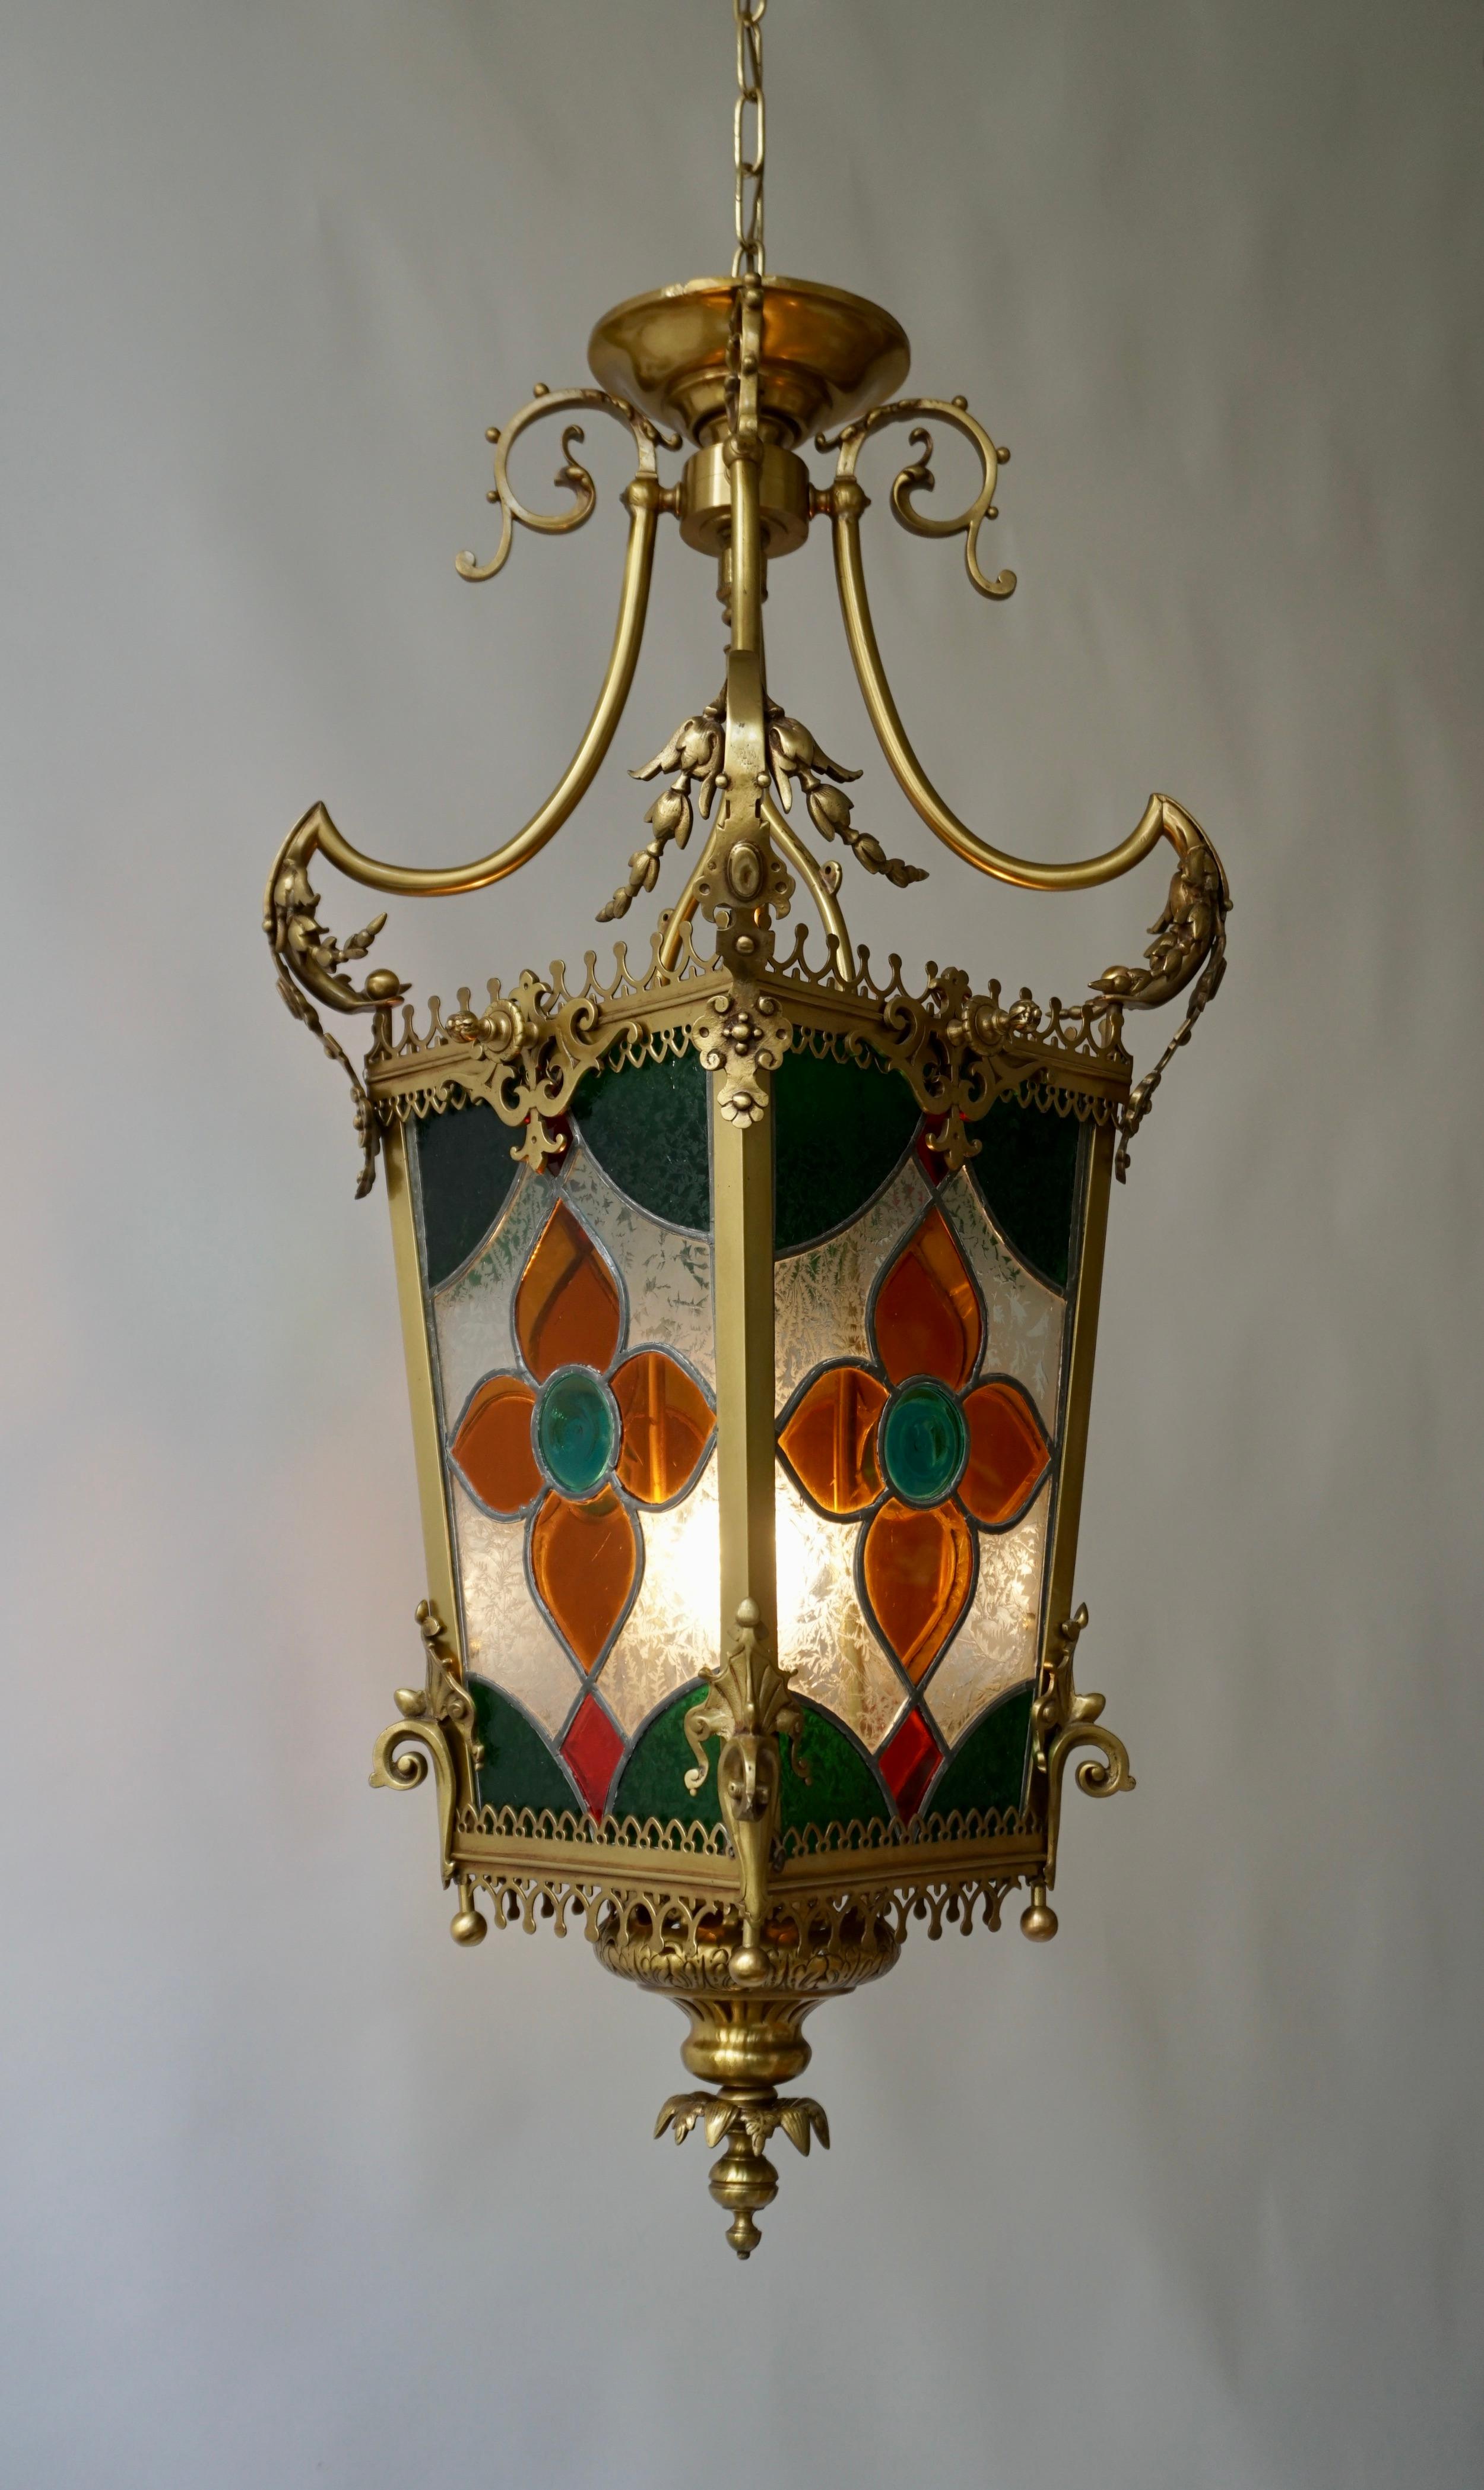 19th Century brass hall lantern with original stained glass panels. 

The lamp has one socket for incandescent lamp with screw base or E27 type LEDs. It is possible to install this fixture in all countries (US, UK, Europe, Asia, Canada), although it